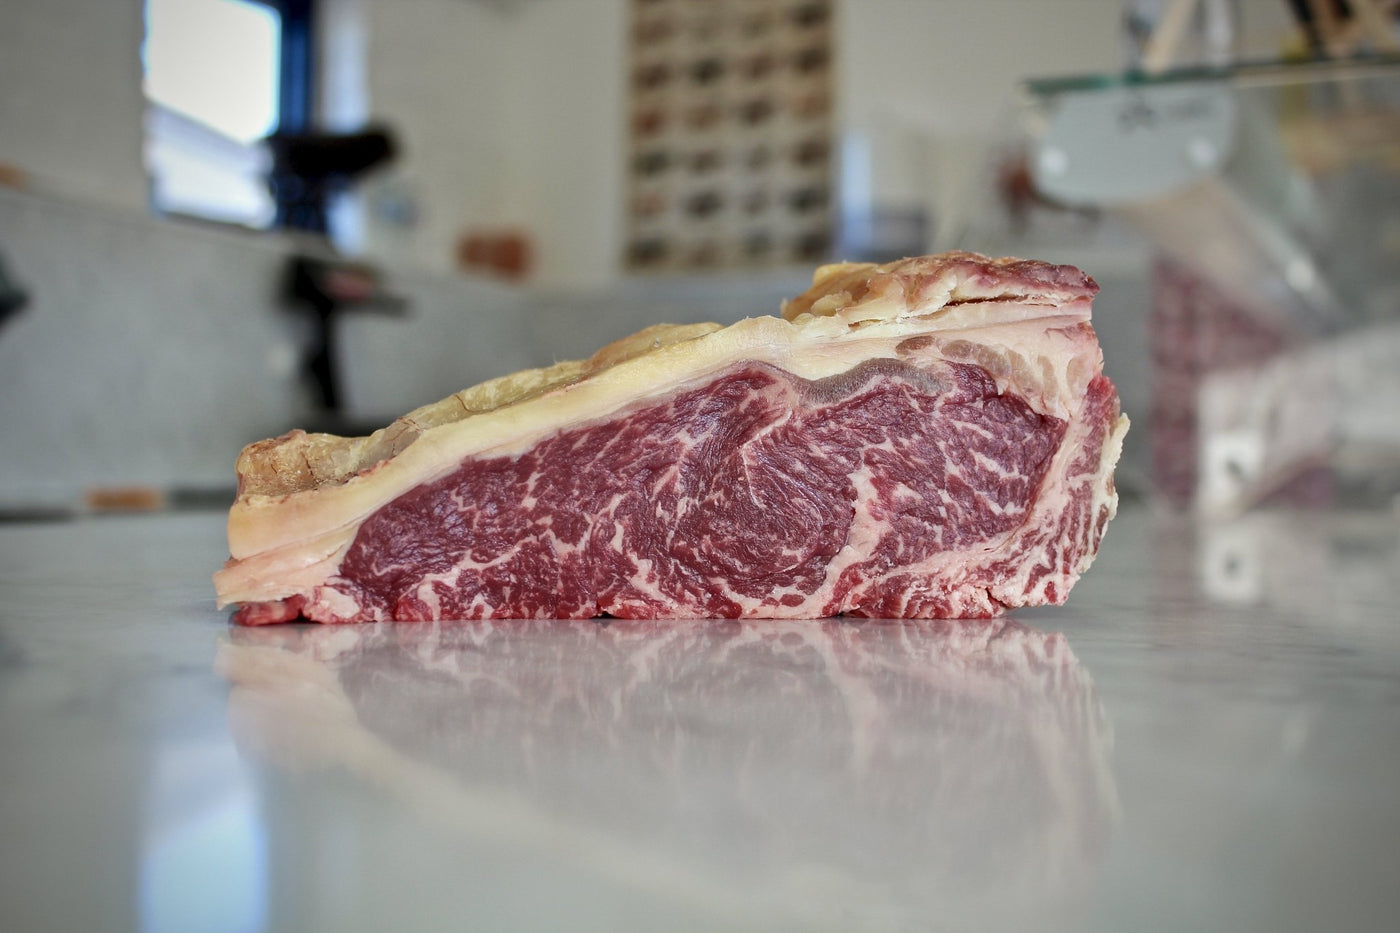 Dry-Aged Galician Sirloin - Beef - Thomas Joseph Butchery - Ethical Dry-Aged Meat The Best Steak UK Thomas Joseph Butchery